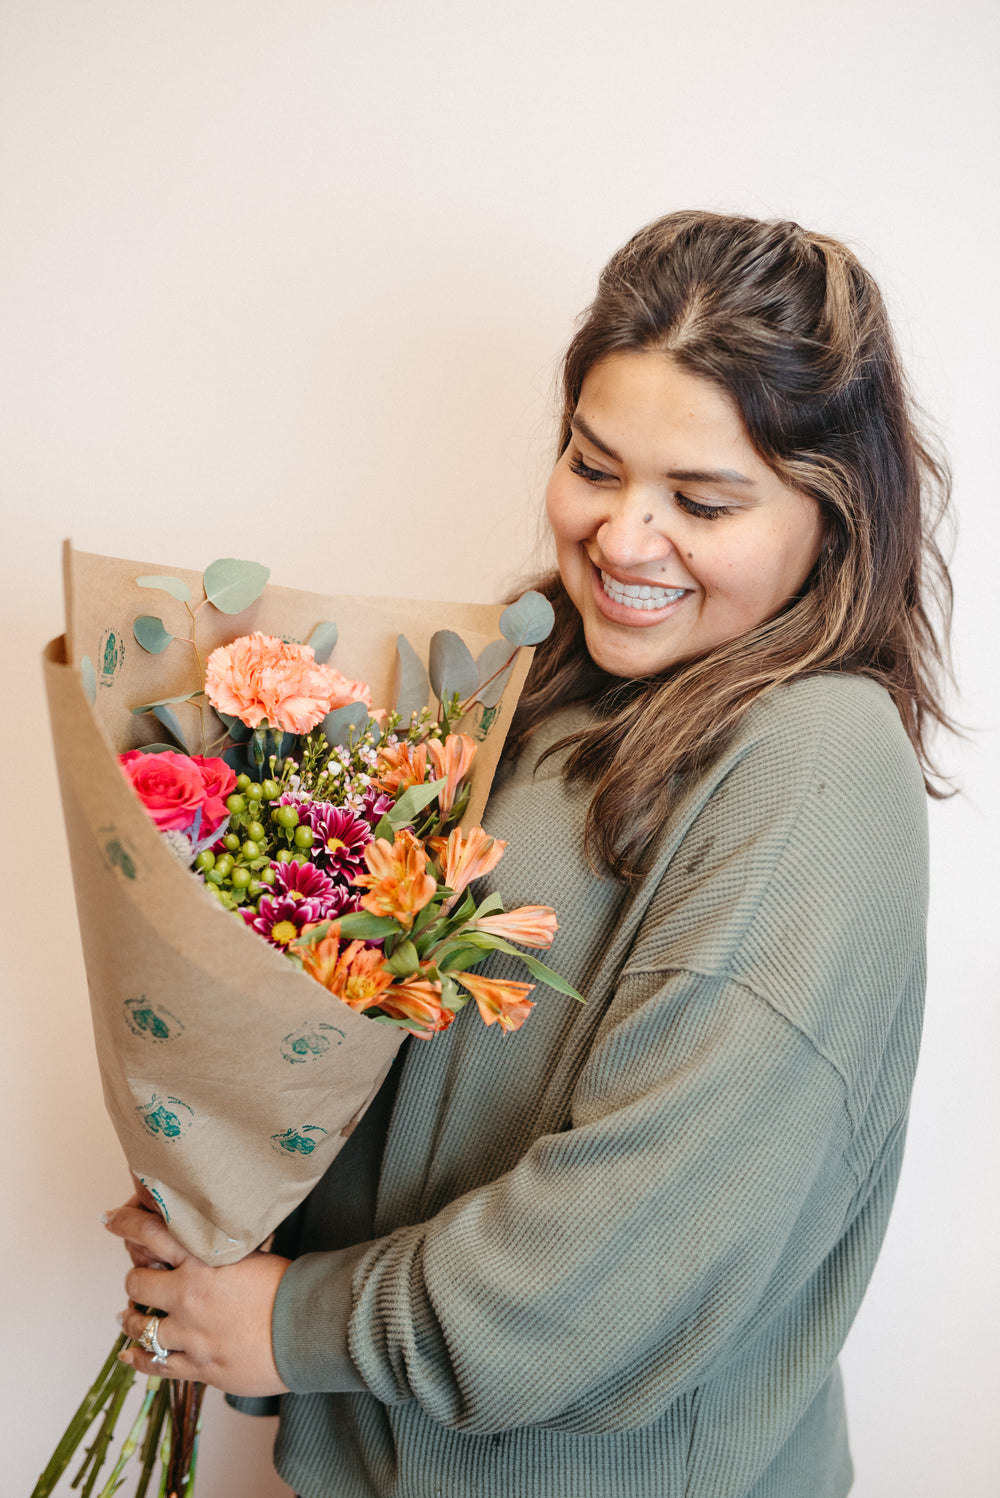 Floral Subscription: (The best gift in the world for your flower lover)